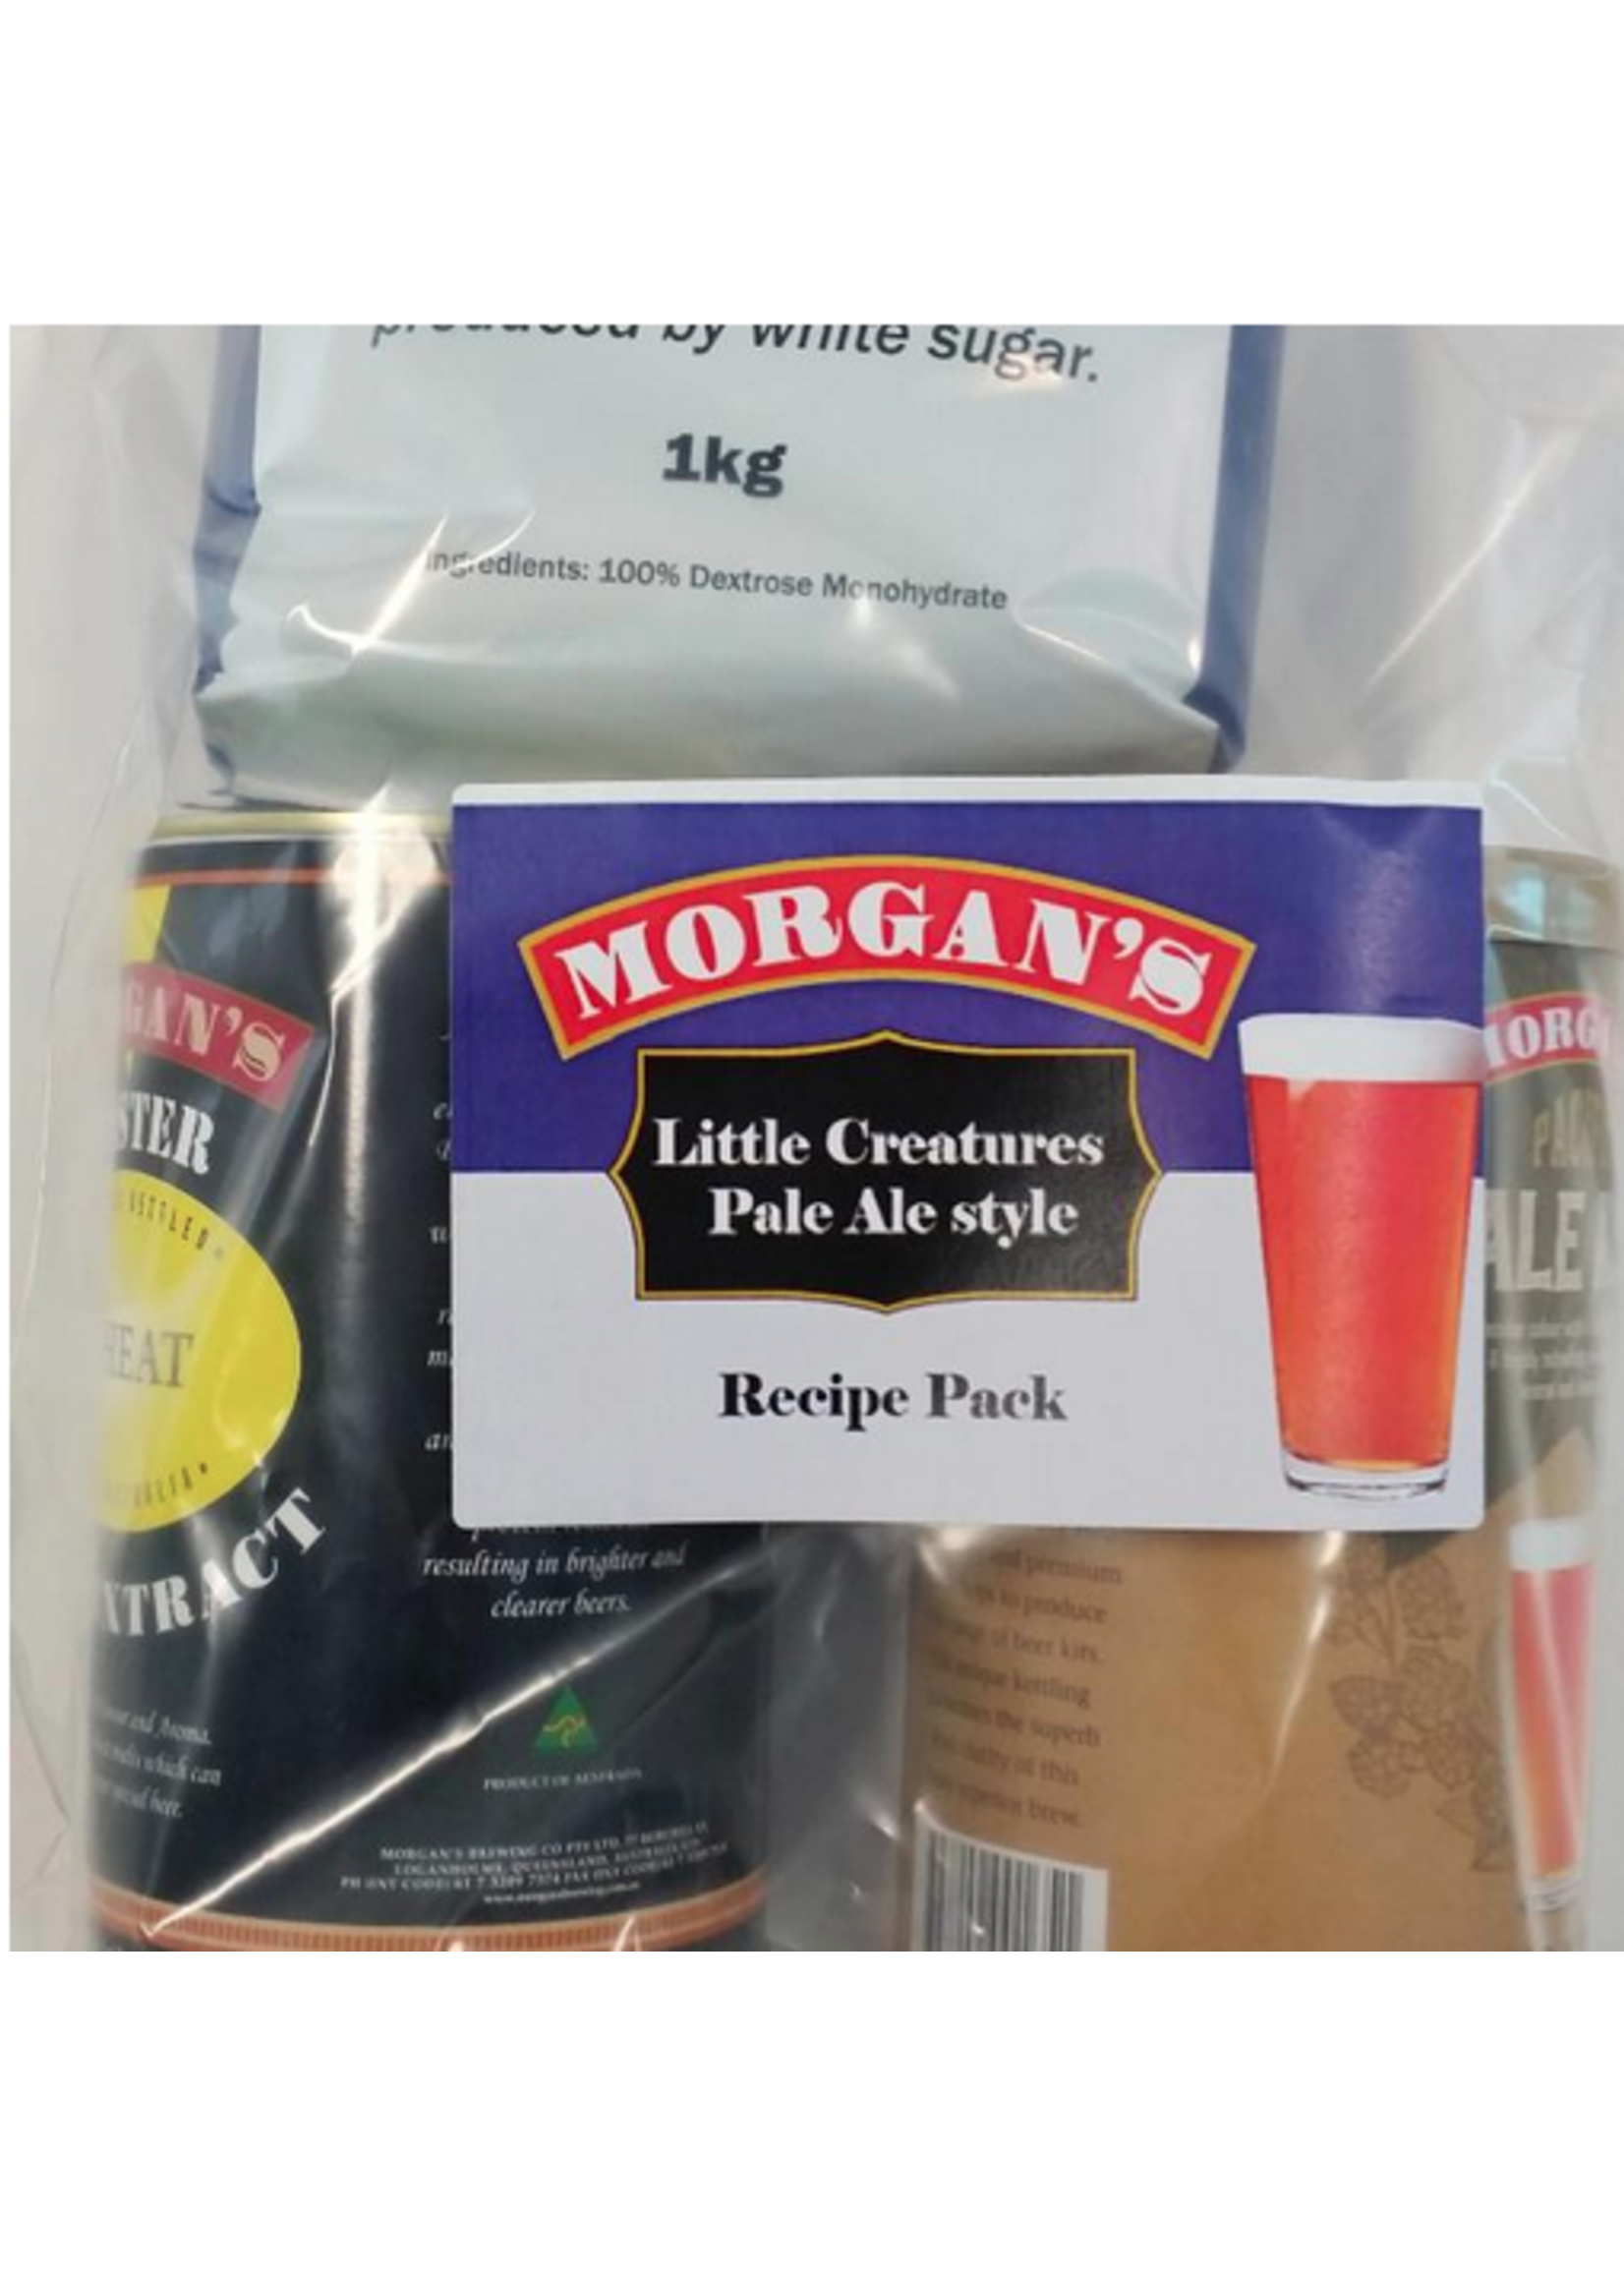 Morgan's Morgans Recipe Pack Little Creatures PA style